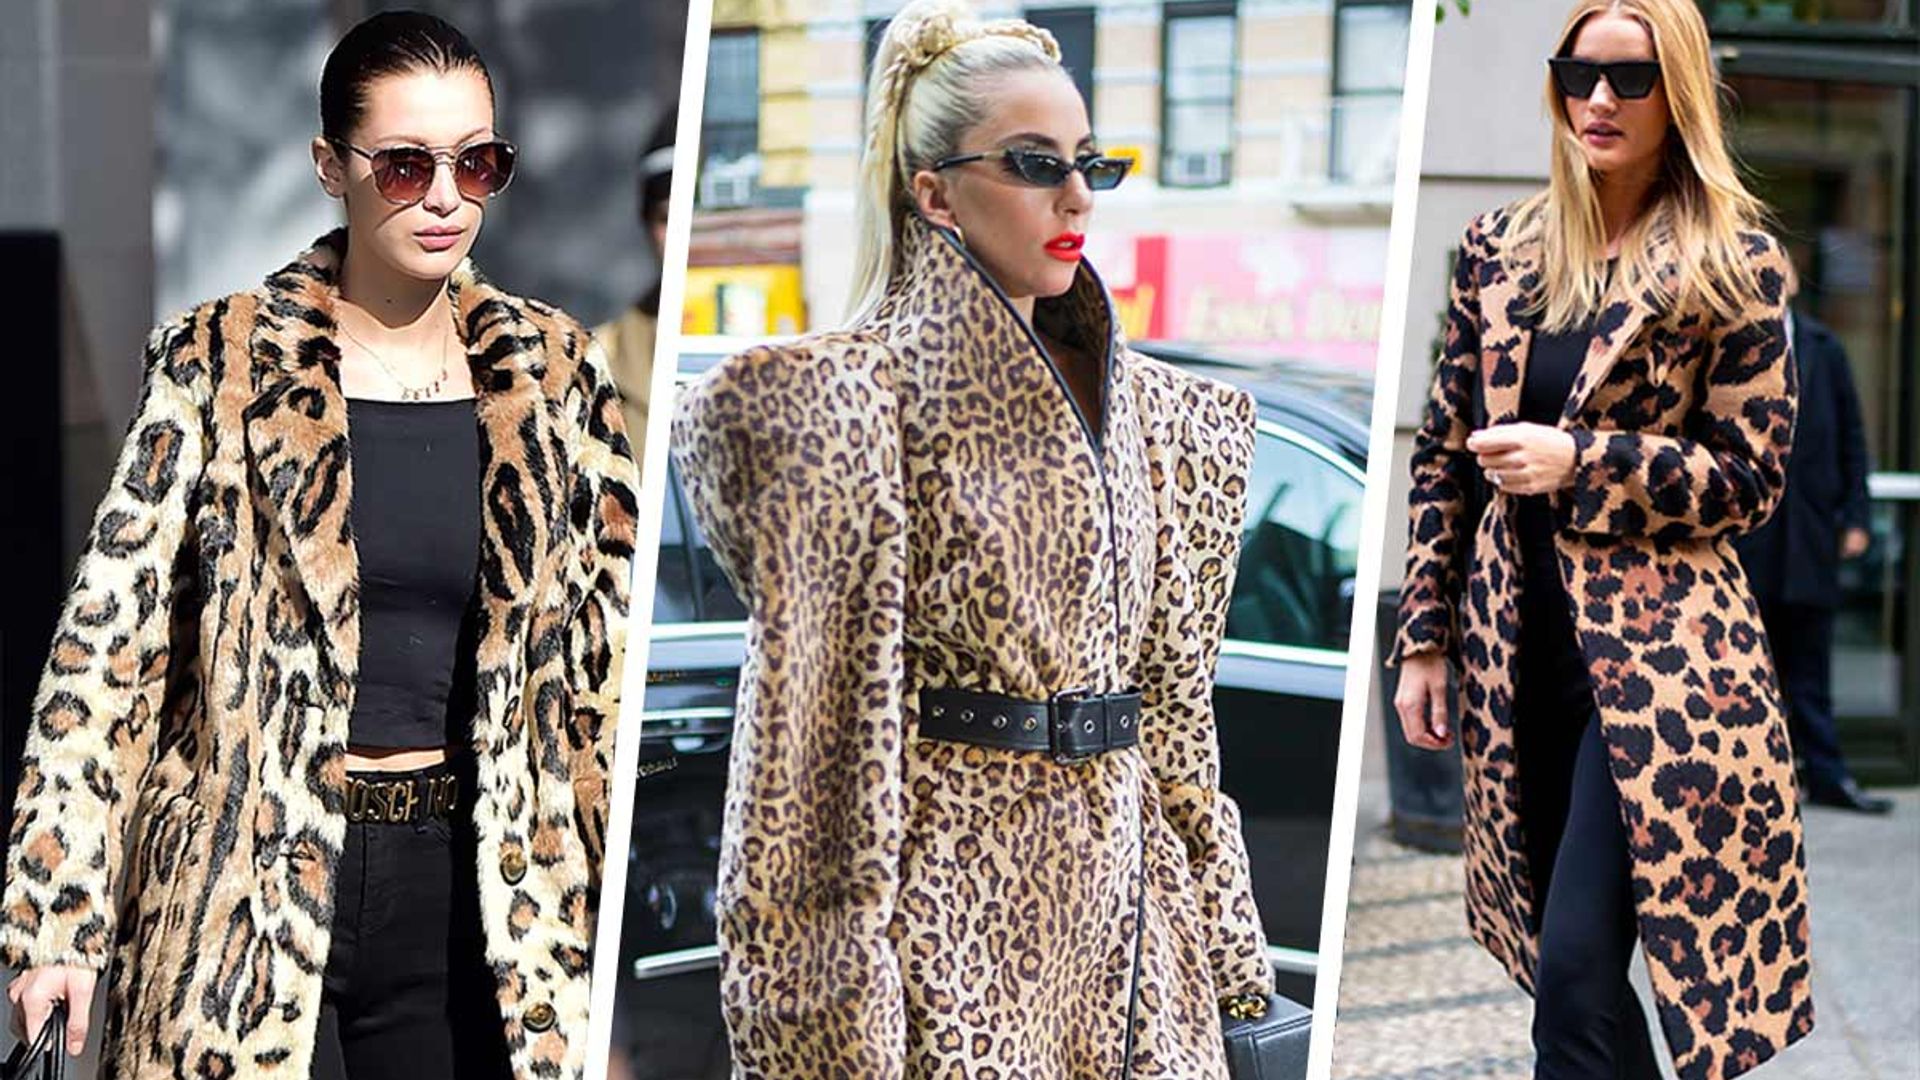 8 best leopard print coats for 2023 inspired by Adele, Bella Hadid